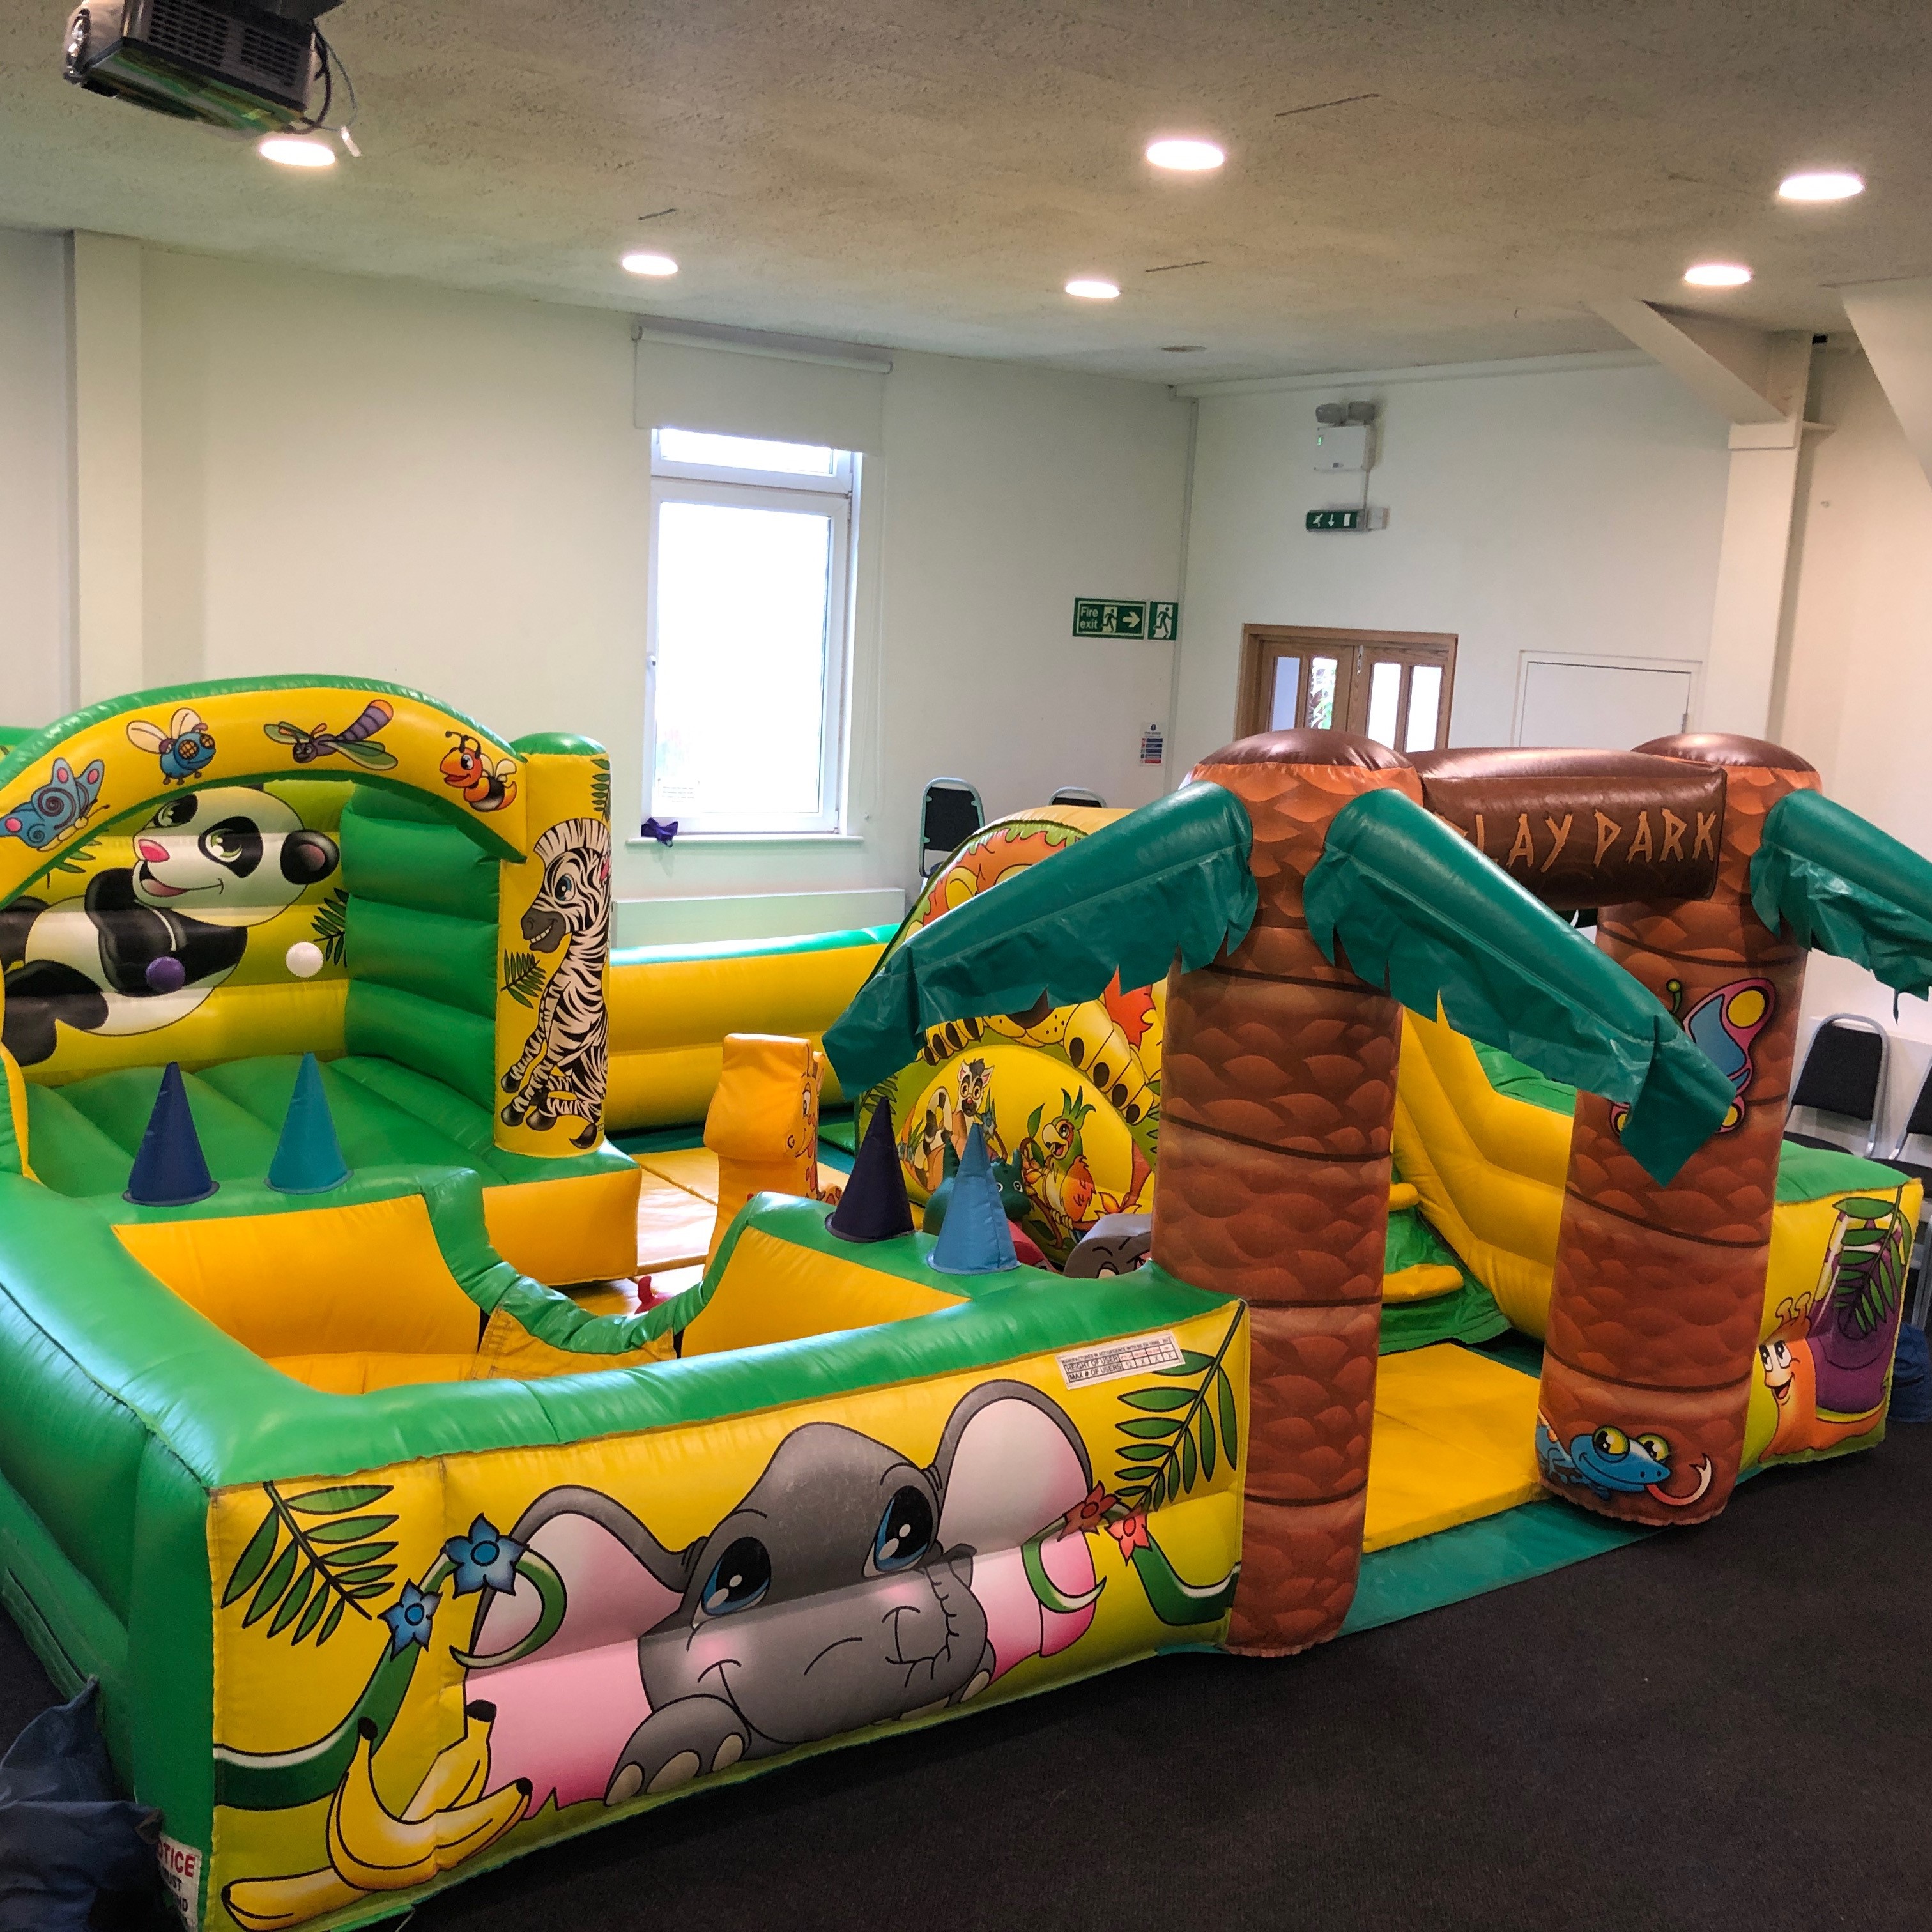 Bouncy Castle Hire & Rodeo Bull Hire In Devon From **MANE EVENTS**